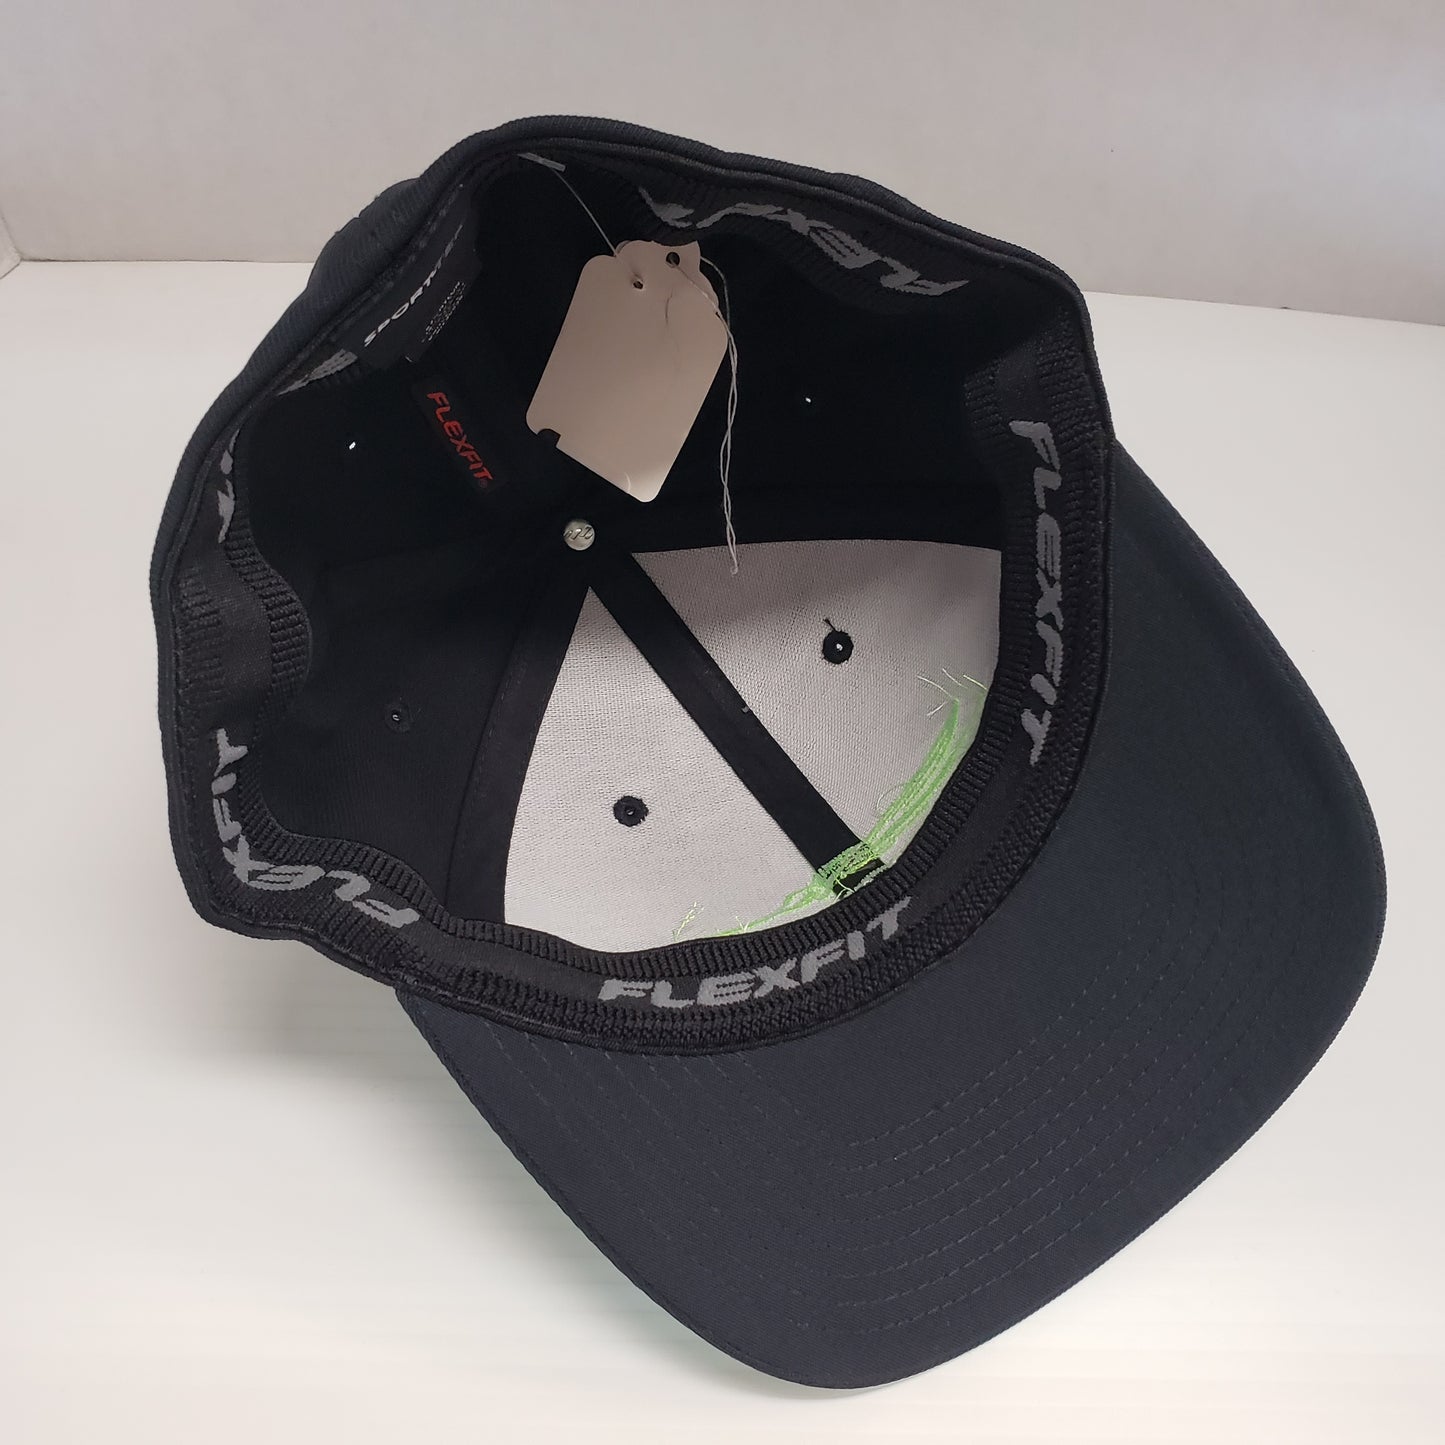 New Authentic Limited Edition Black/Neon logo Flex Fit Skeeter Hat